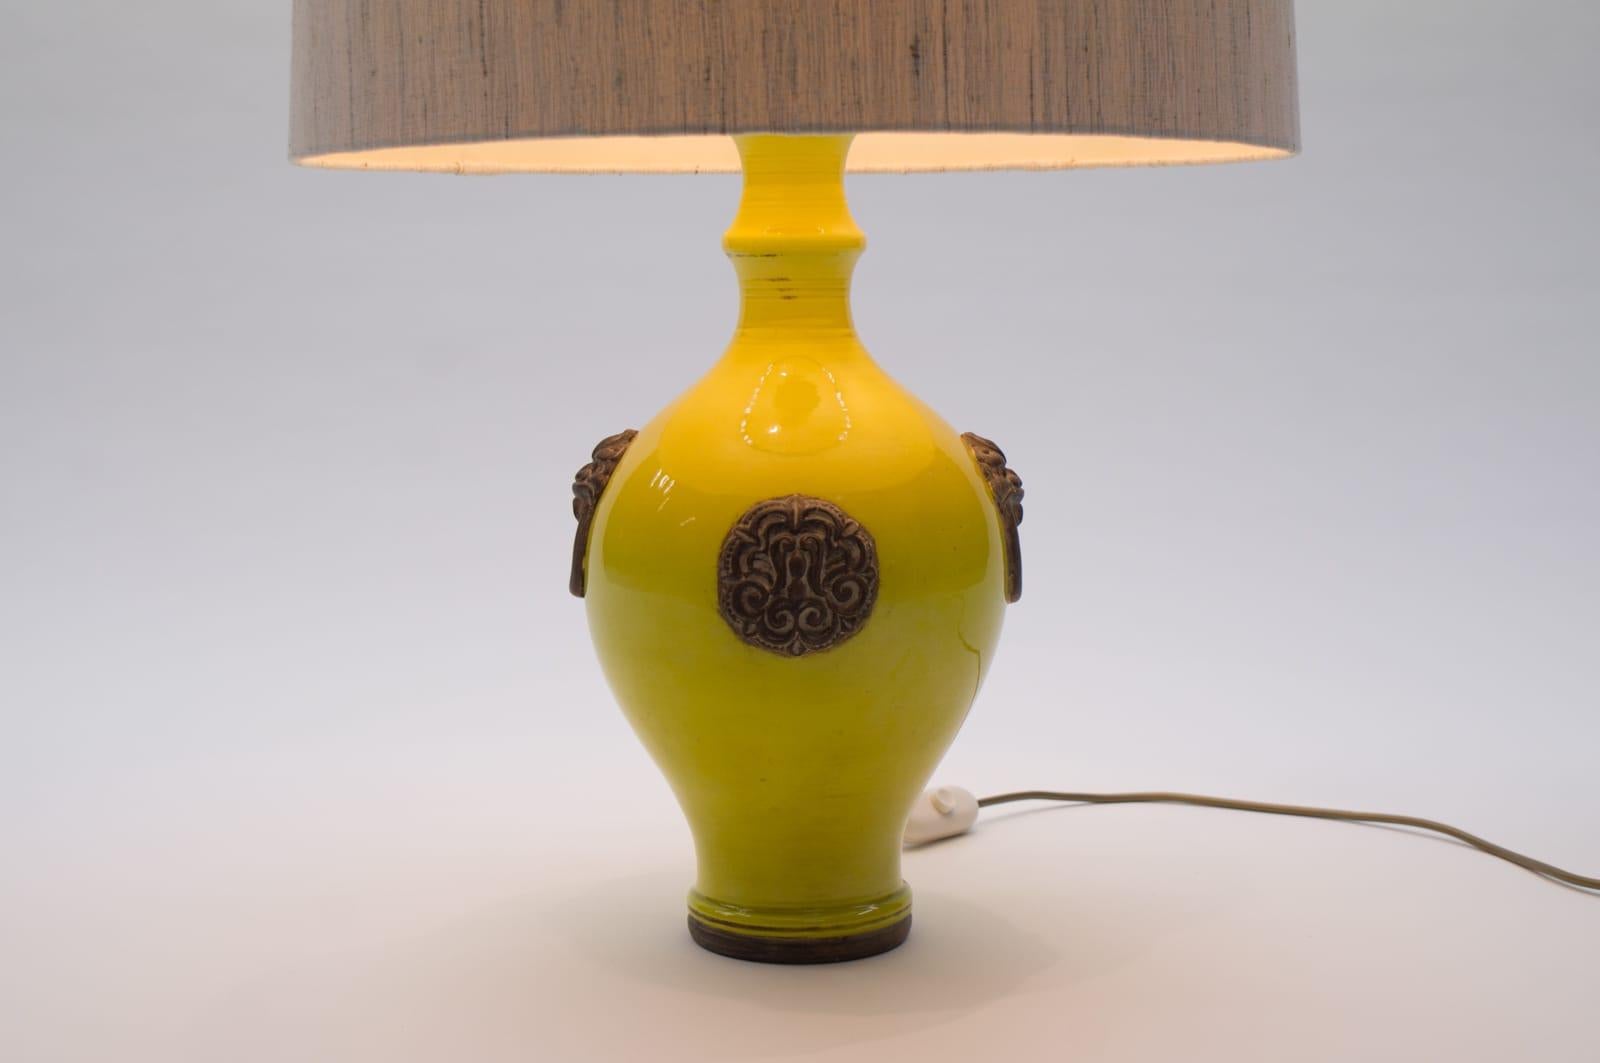 Oatmeal and Yellow Gilt Glazed Ceramic Table Lamp by Ugo Zaccagnini, Italy 1960s Excellent état - En vente à Nürnberg, Bayern